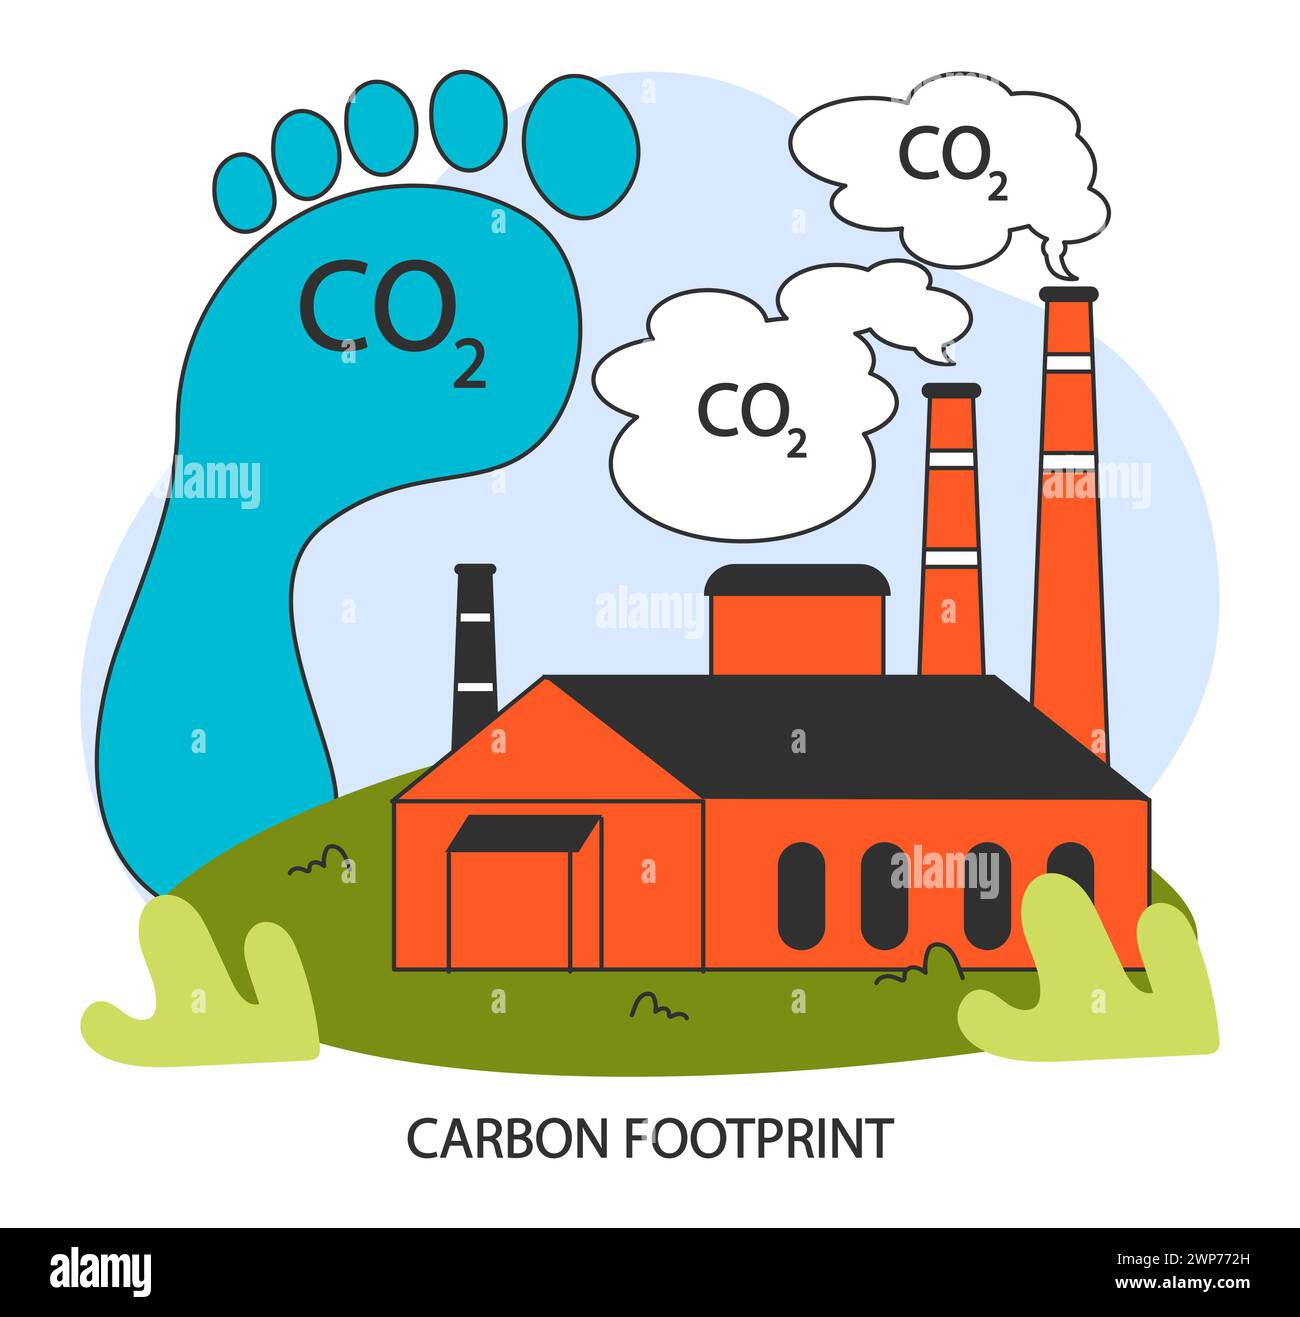 CO2 emissions. Carbon dioxide air pollution. Production footprint with greenhouse gases. Global warming crisis. Factory chimney with smoke cloud. Flat vector illustration Stock Vector